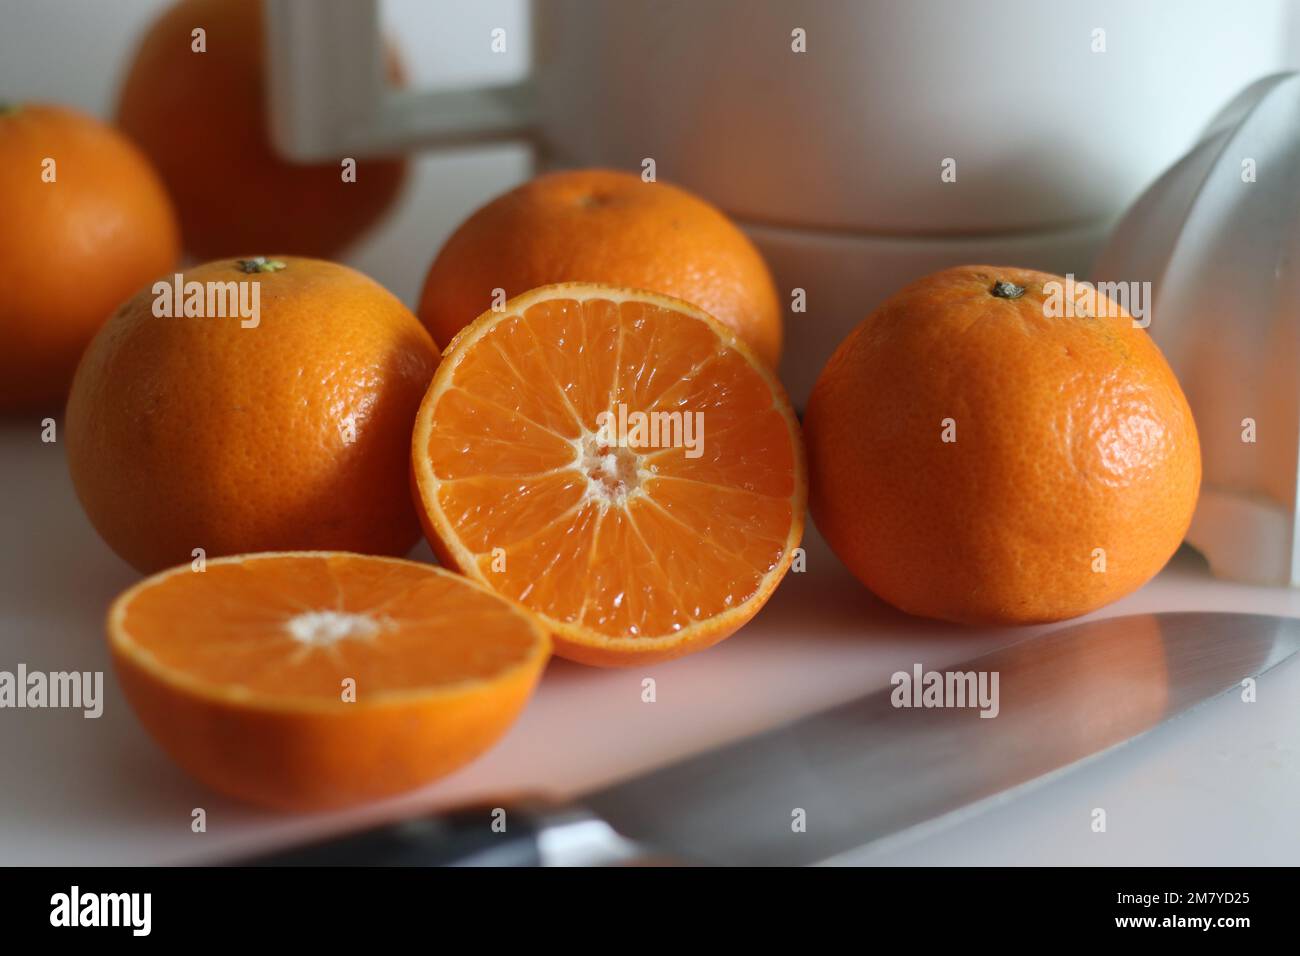 Sliced Malta or Valencia Orange. It is a citrus fruit grown in India, commonly called as sangtra shot along with citrus juicer on a white background. Stock Photo